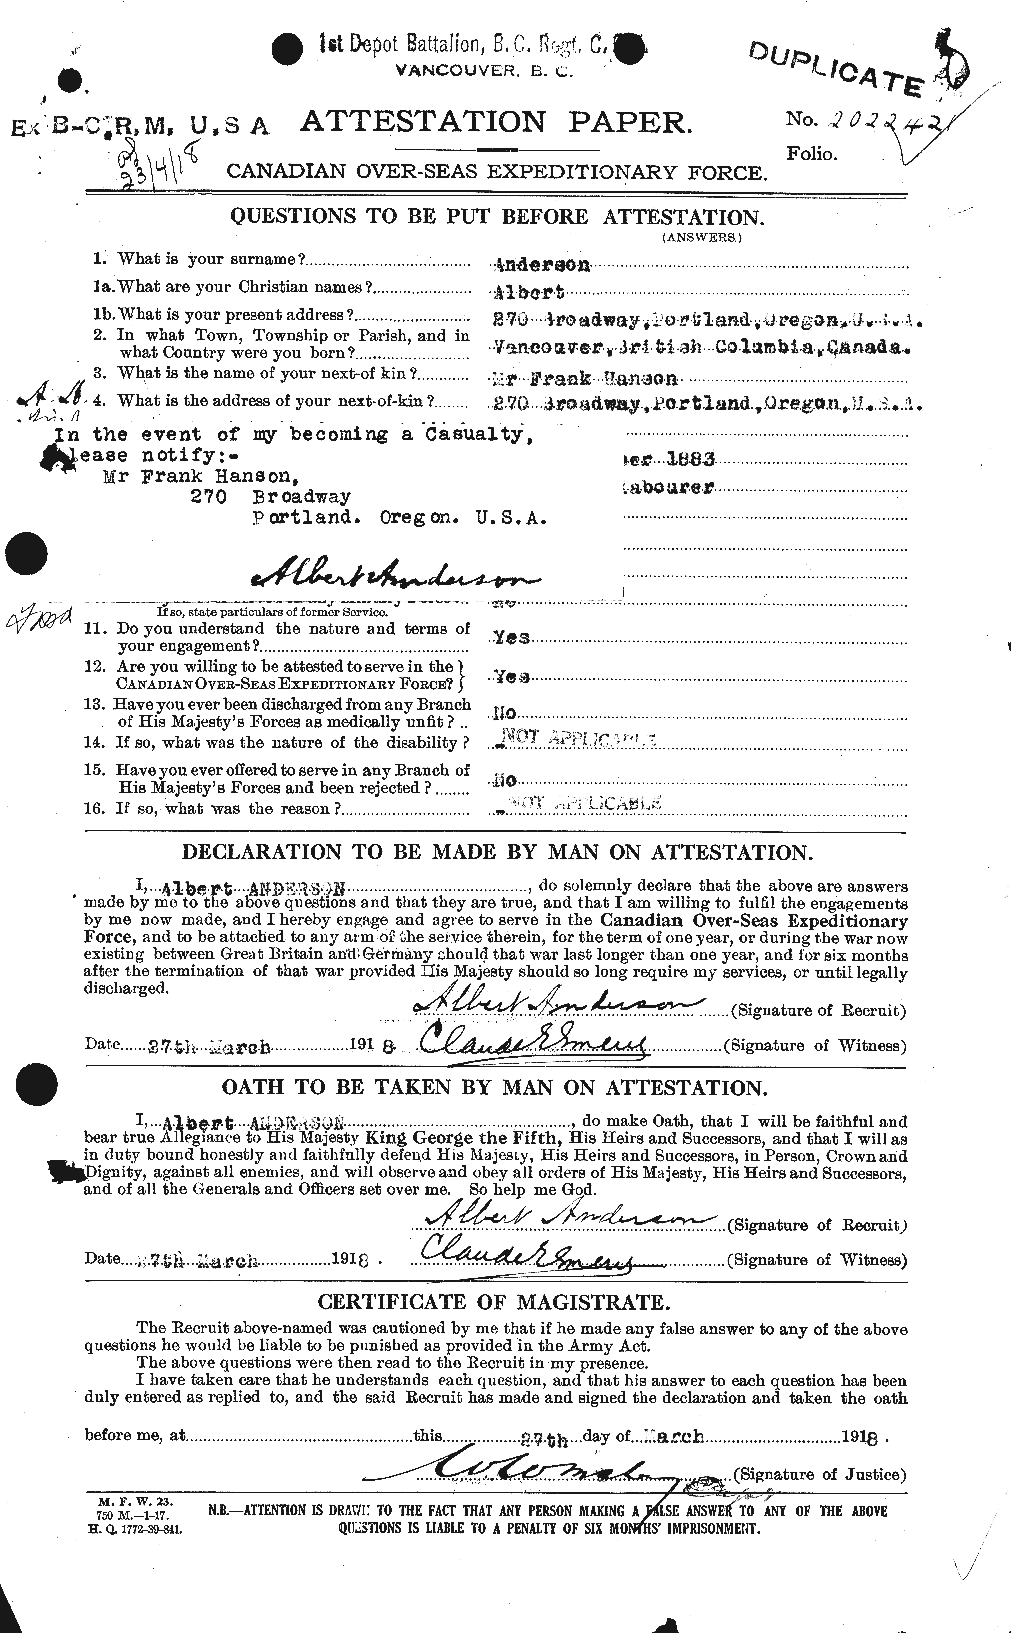 Personnel Records of the First World War - CEF 209552a